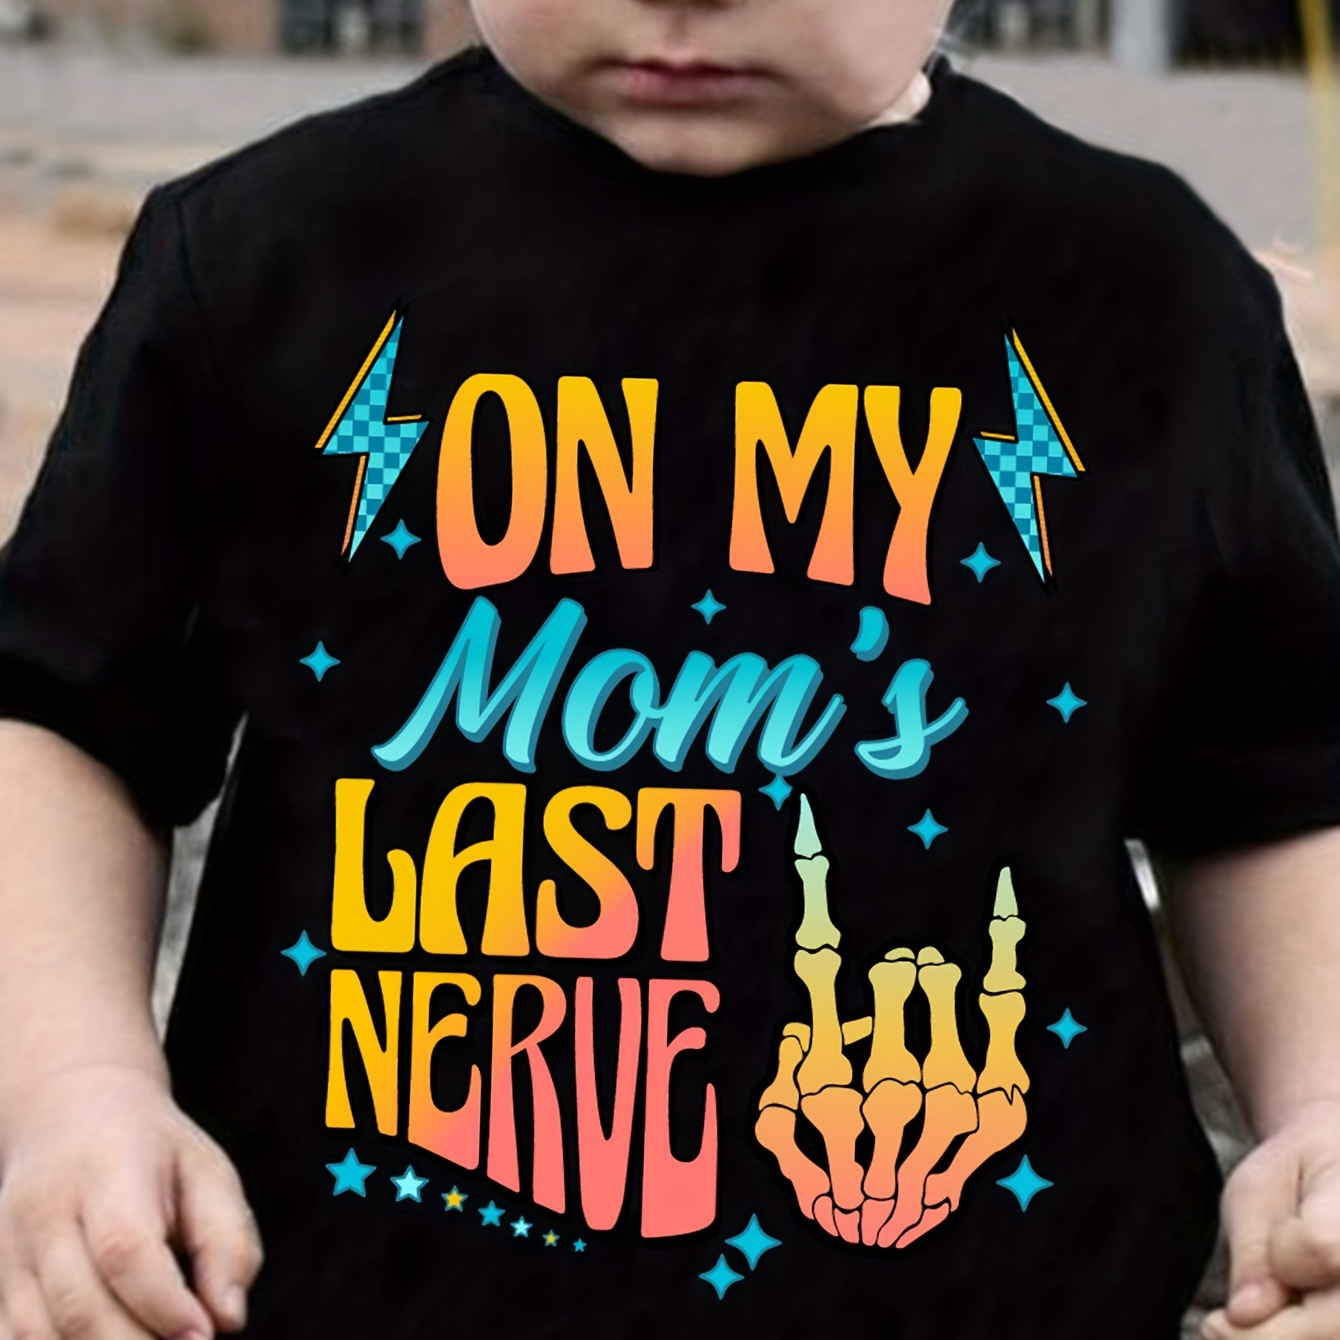 

On My Mom's Last Nerve & Cartoon Lightening & Skeletal Hand Graphic Print Tee, Boys' Casual & Trendy Crew Neck Short Sleeve T-shirt For Spring & Summer, Boys' Clothes For Everyday Life